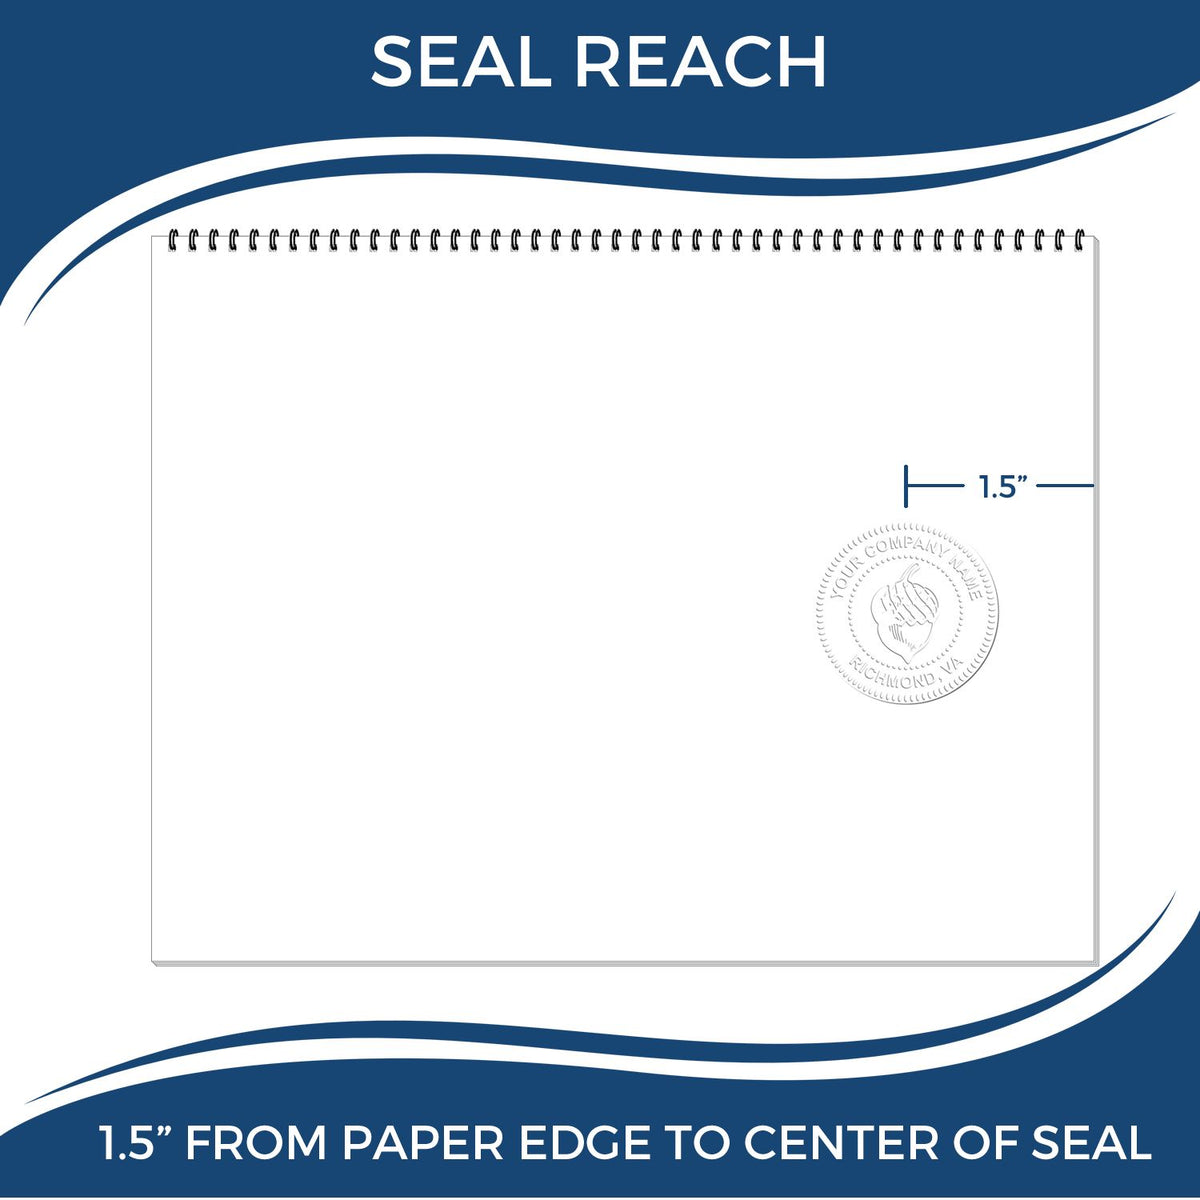 An infographic showing the seal reach which is represented by a ruler and a miniature seal image of the State of Minnesota Soft Land Surveyor Embossing Seal